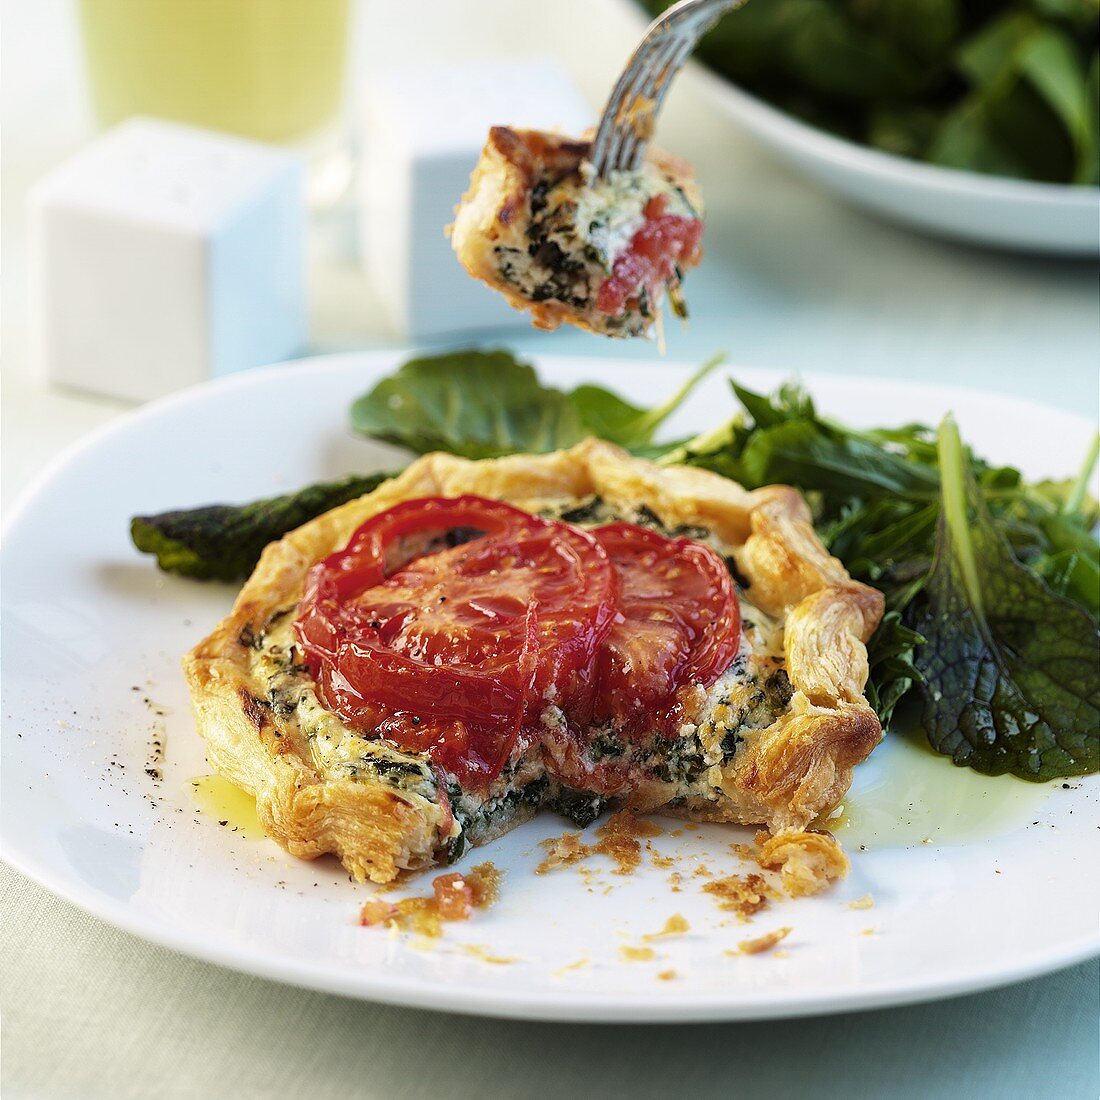 Puff pastry tartlet with spinach and tomato filling